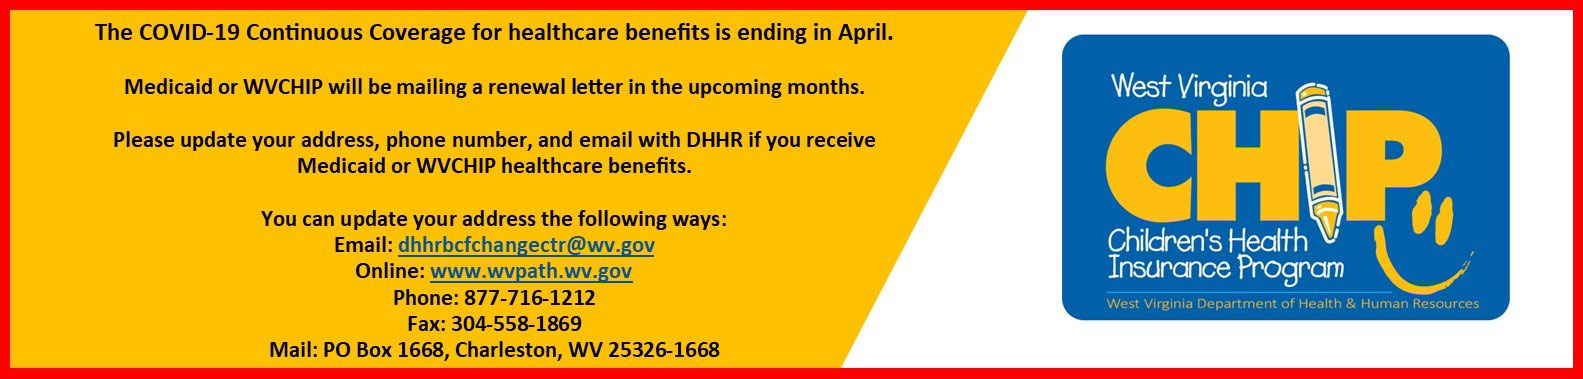 COVID-19 Continuous Coverage for healthcare benefits ending in April.